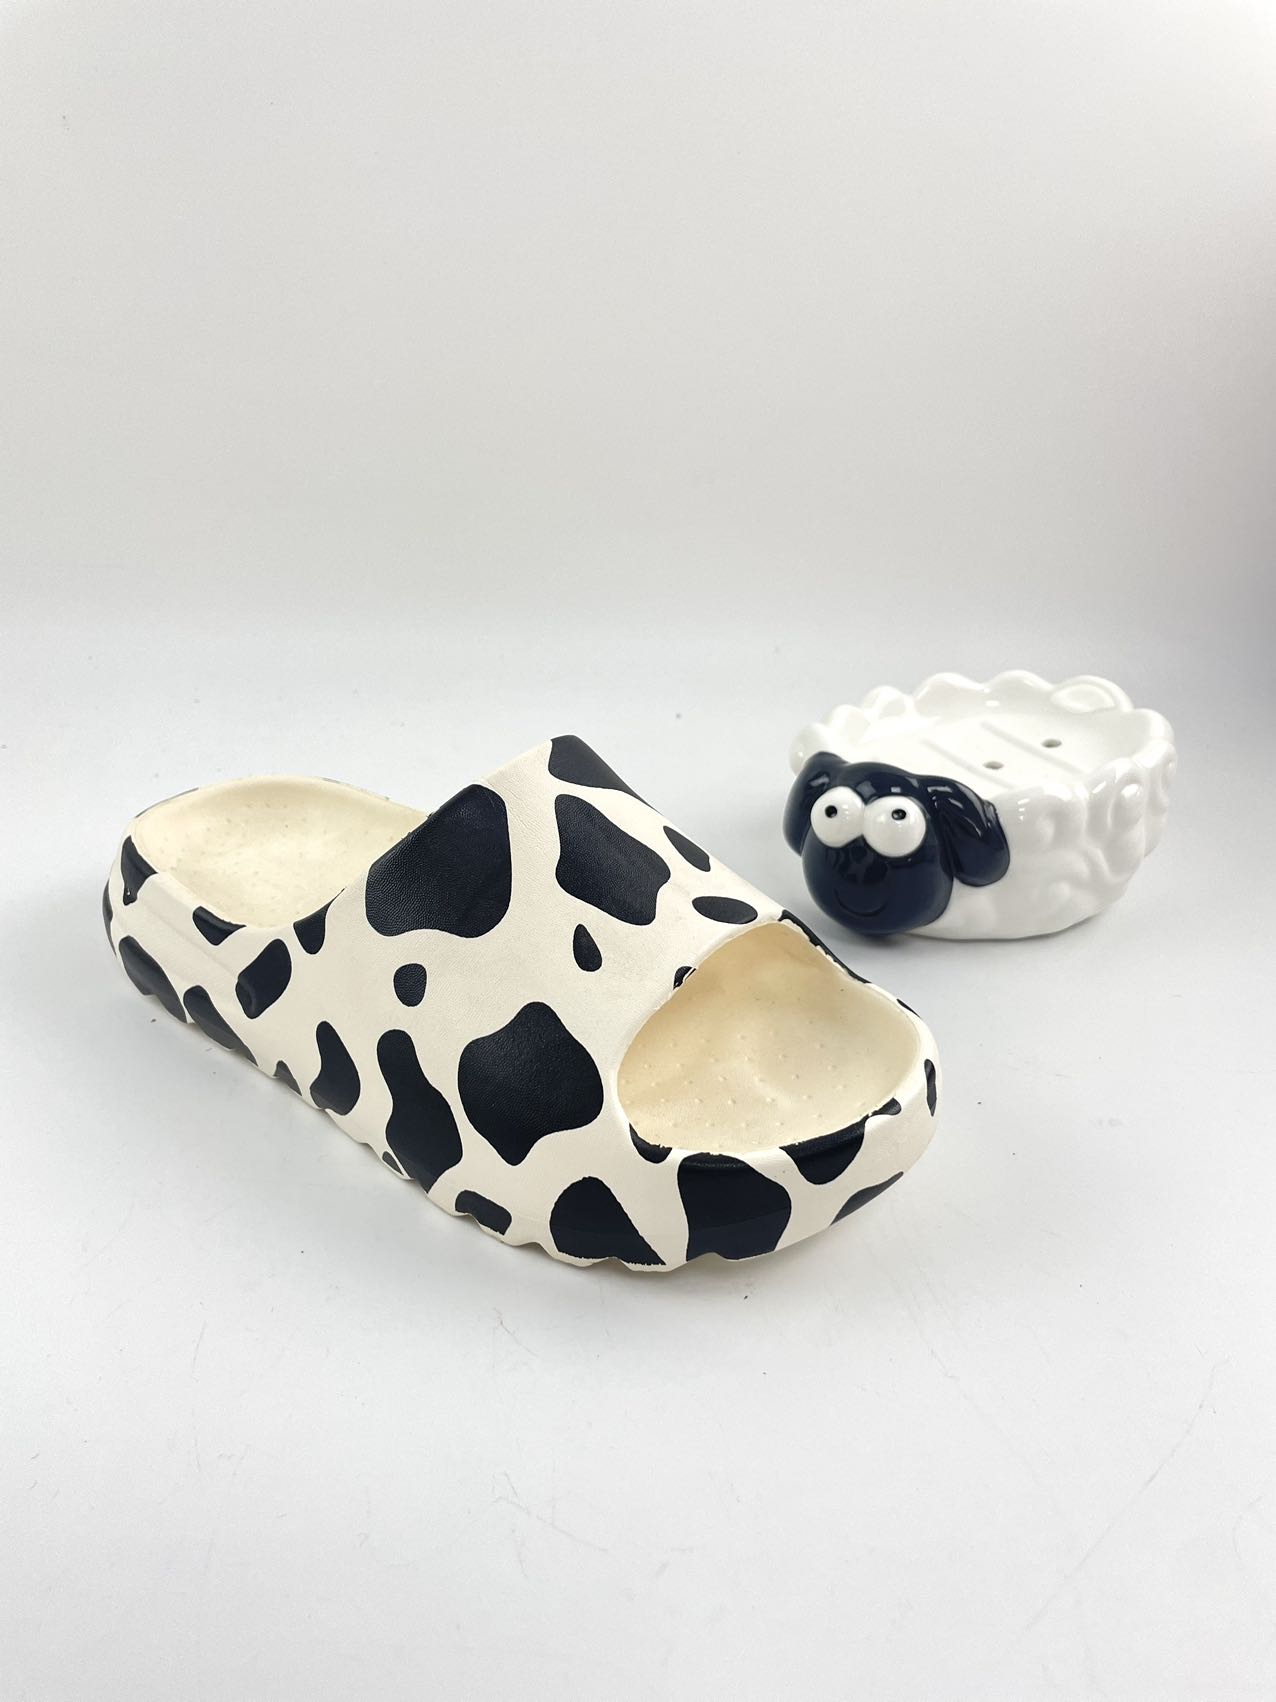 Black and White Cow Pattern Yeezy Style Slide Cow Slipper with Thick and Soft Sole For Men and Women